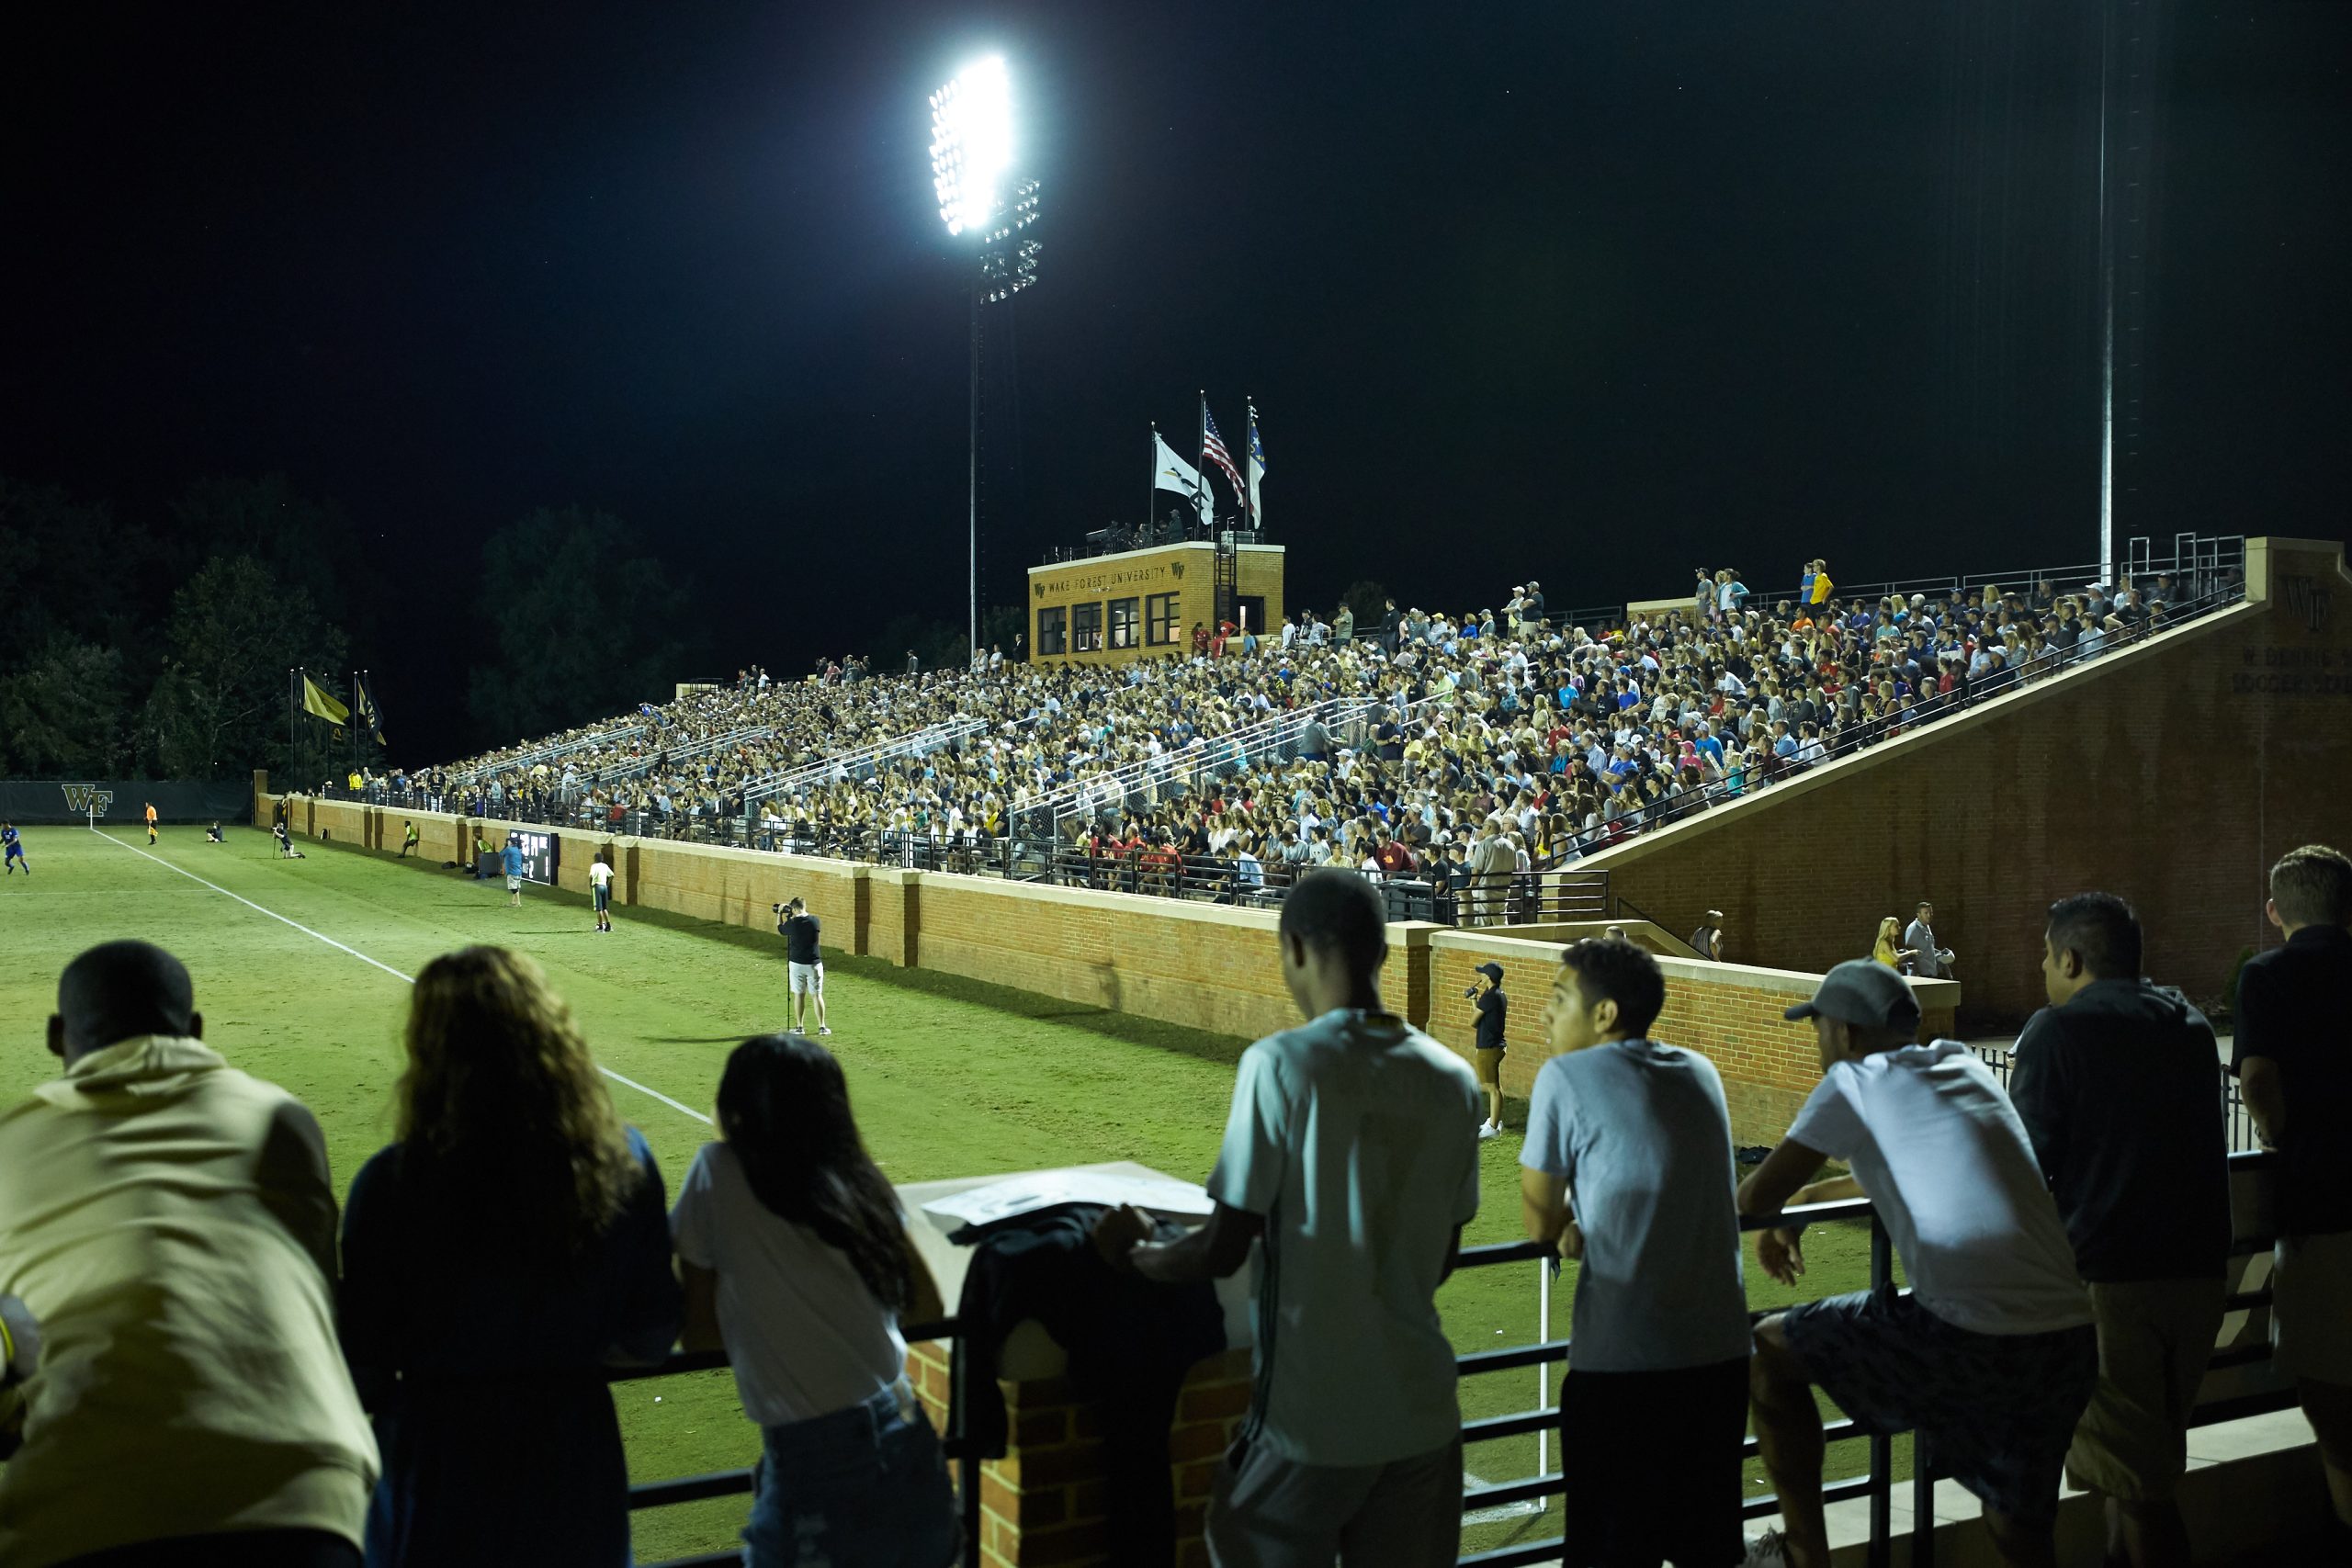 A crowd of 4,937 fans were on hand to witness the ACC men's soccer match between the Duke Blue Devils and the Wake Forest Demon Deacons at W. Dennie Spry Soccer Stadium on September 29, 2018 in Winston-Salem, North Carolina.  The Demon Deacons defeated the Blue Devils 4-2.  (Brian Westerholt/Sports On Film)